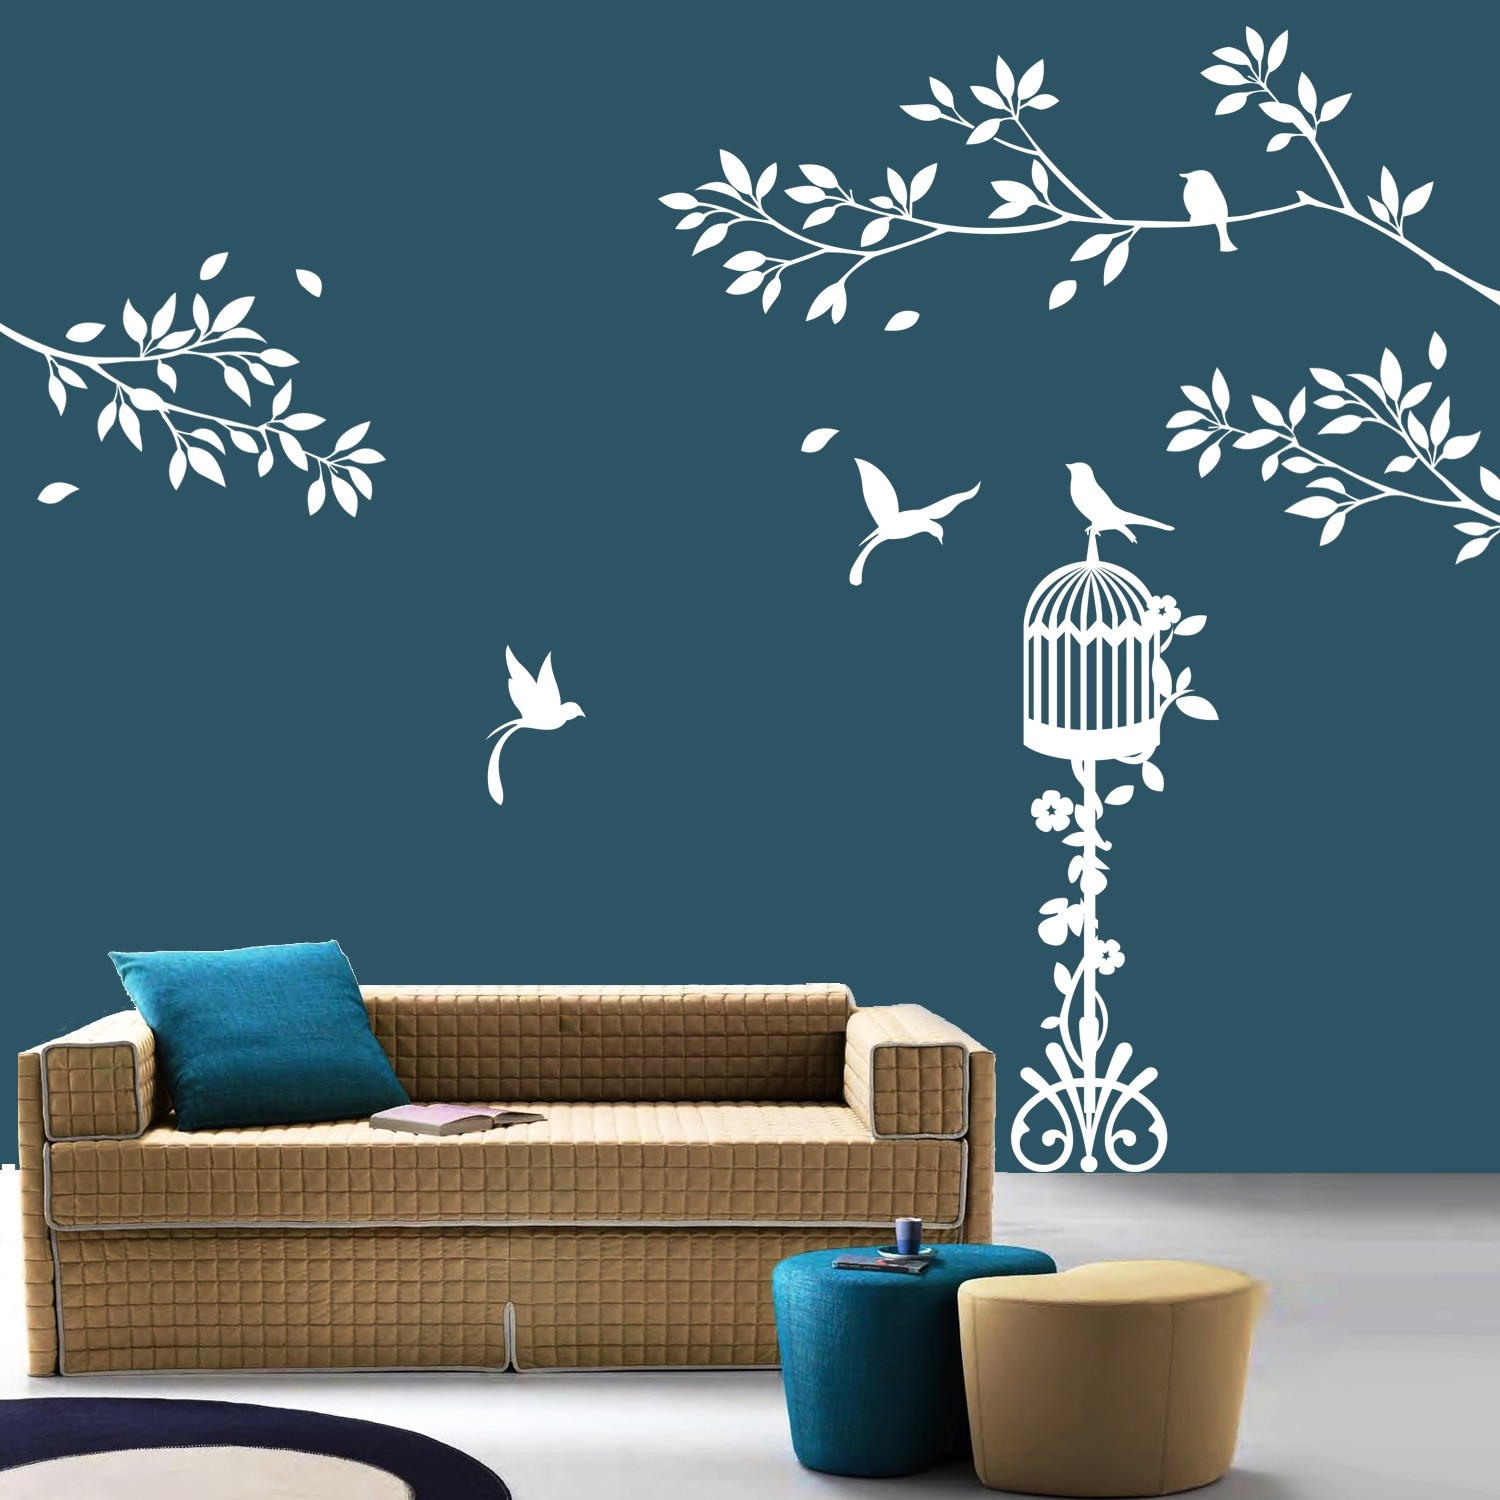 Birds Paradise Wall Sticker Decal-Small-White